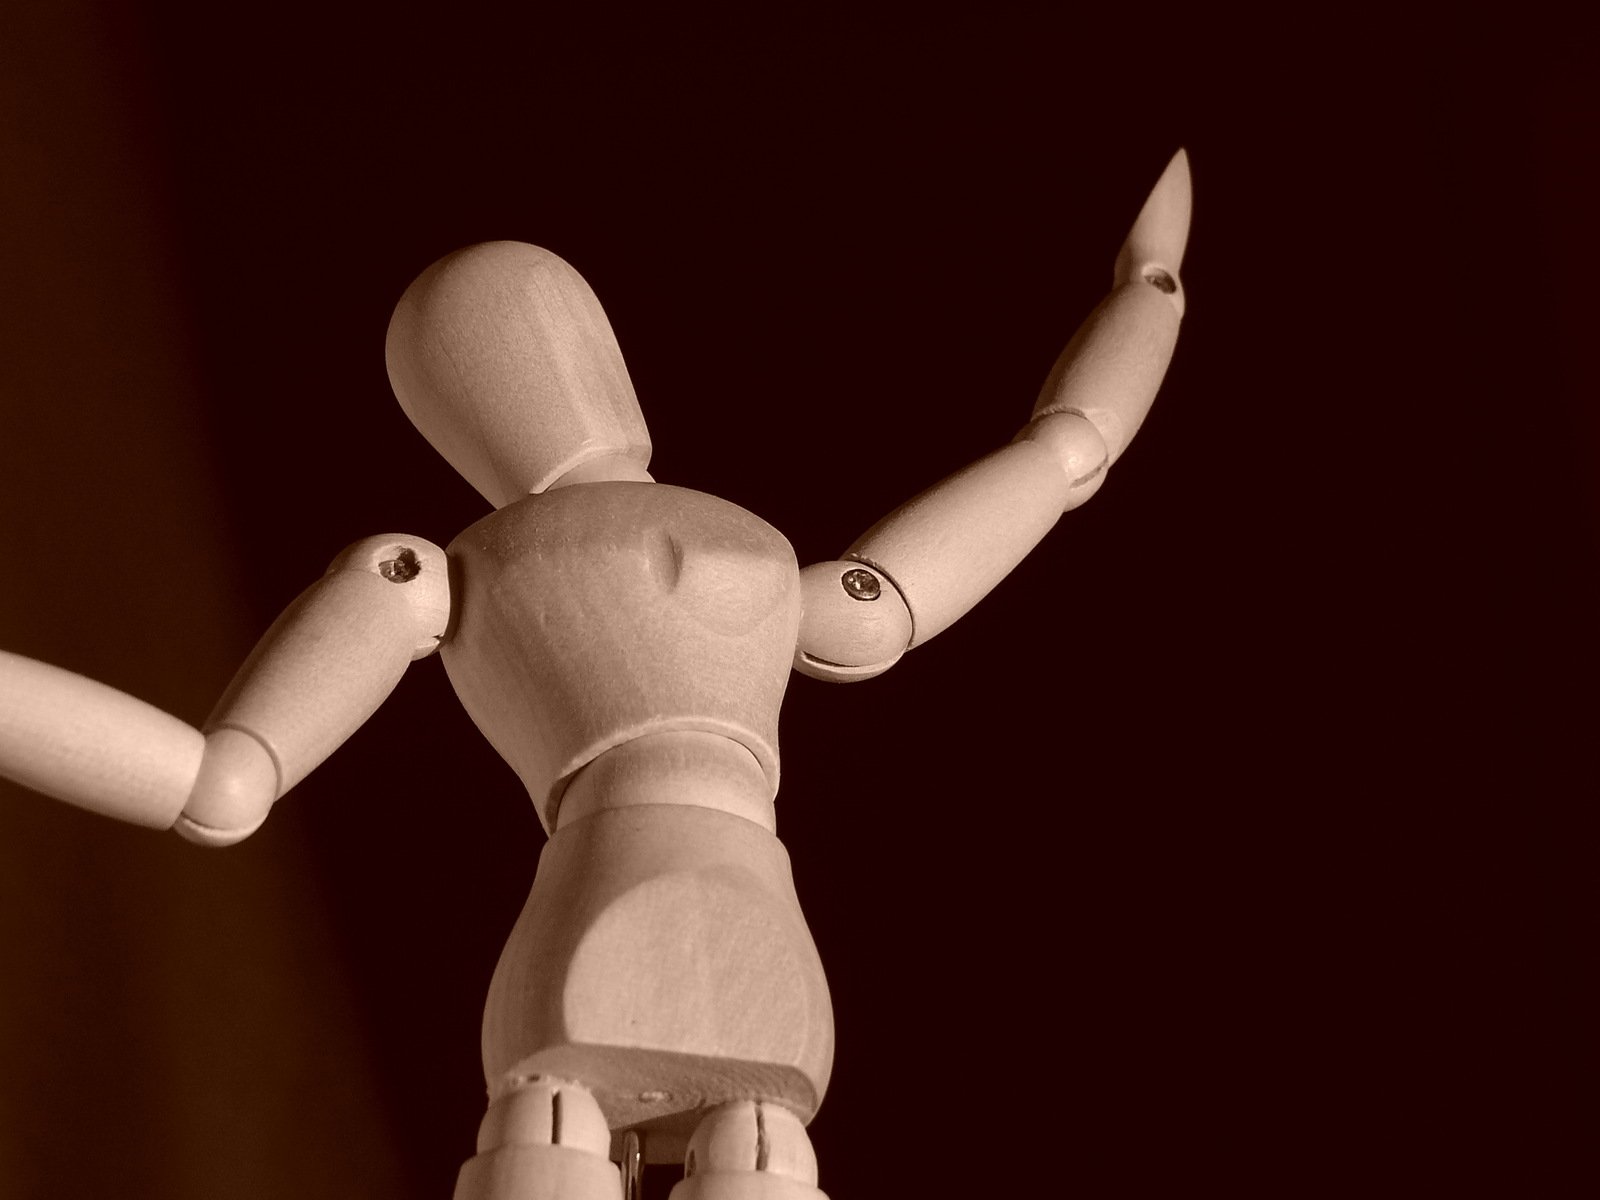 a toy figurine is shown in black and white